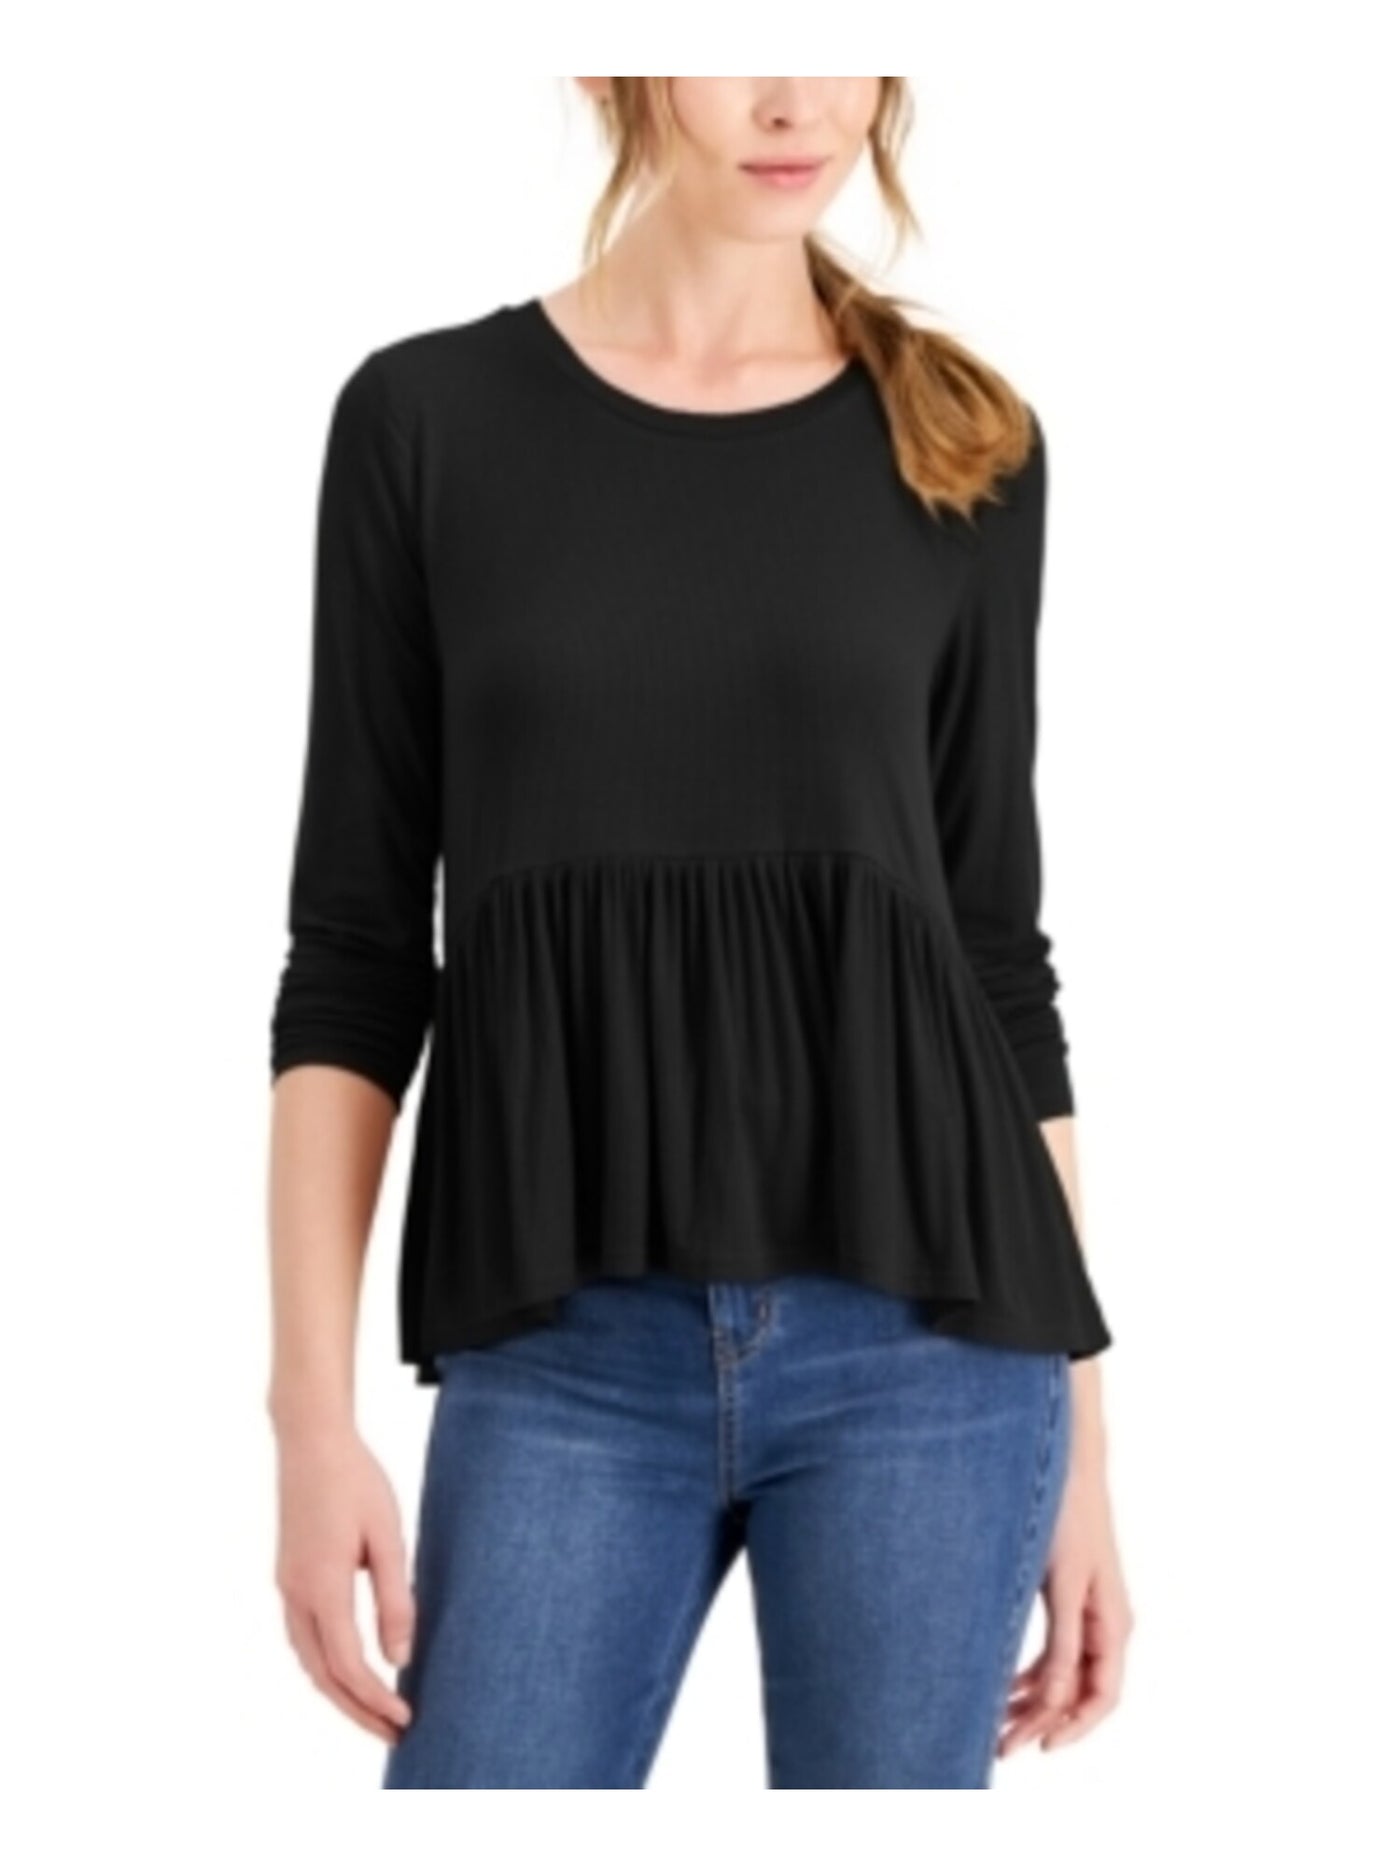 HOOKED UP Womens Black Stretch Ribbed Textured Babydoll Long Sleeve Jewel Neck Top Juniors S